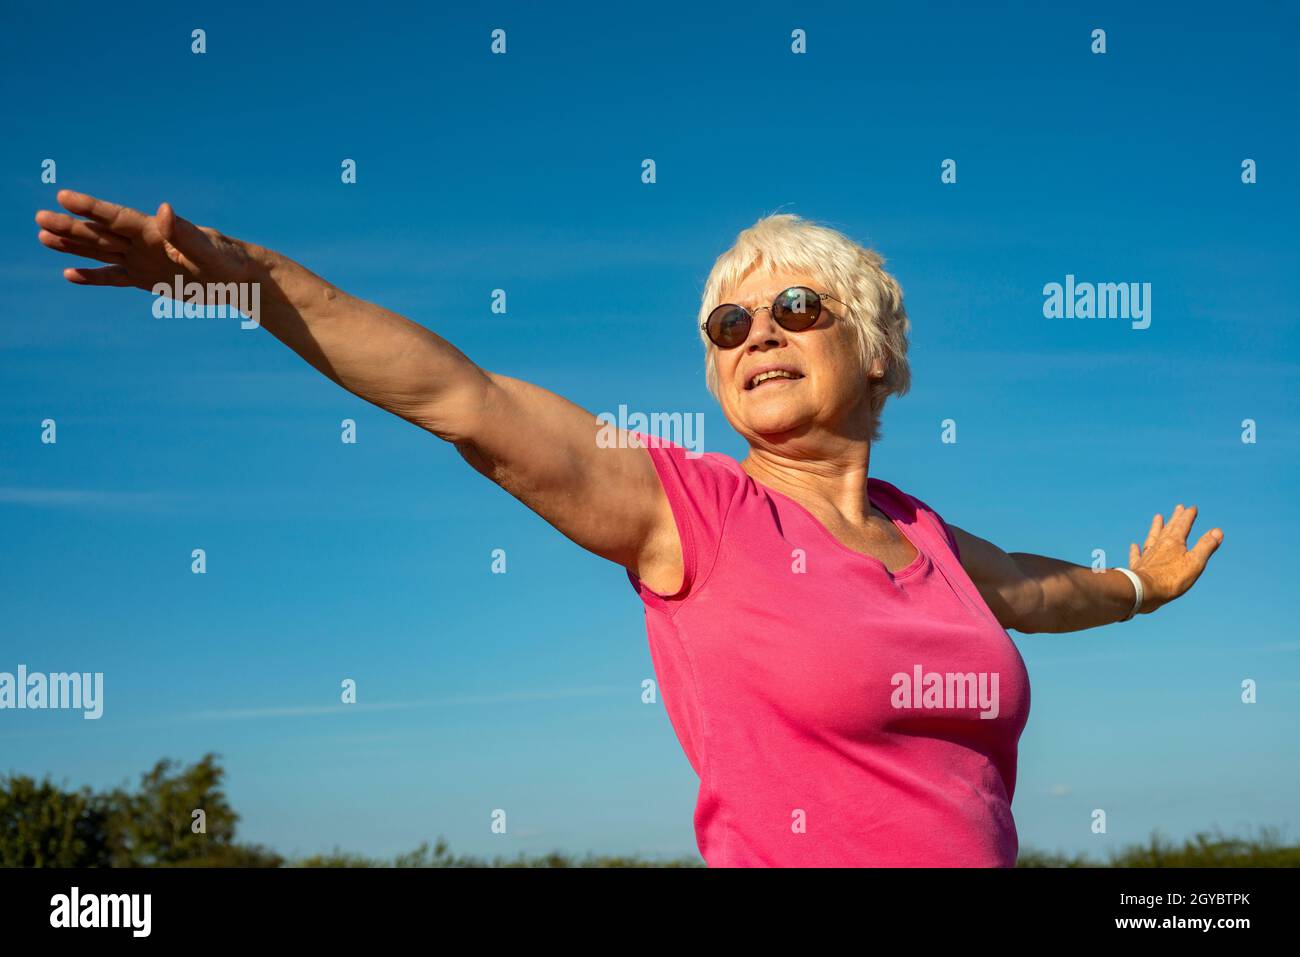 Woman exercising outdoors Banque D'Images